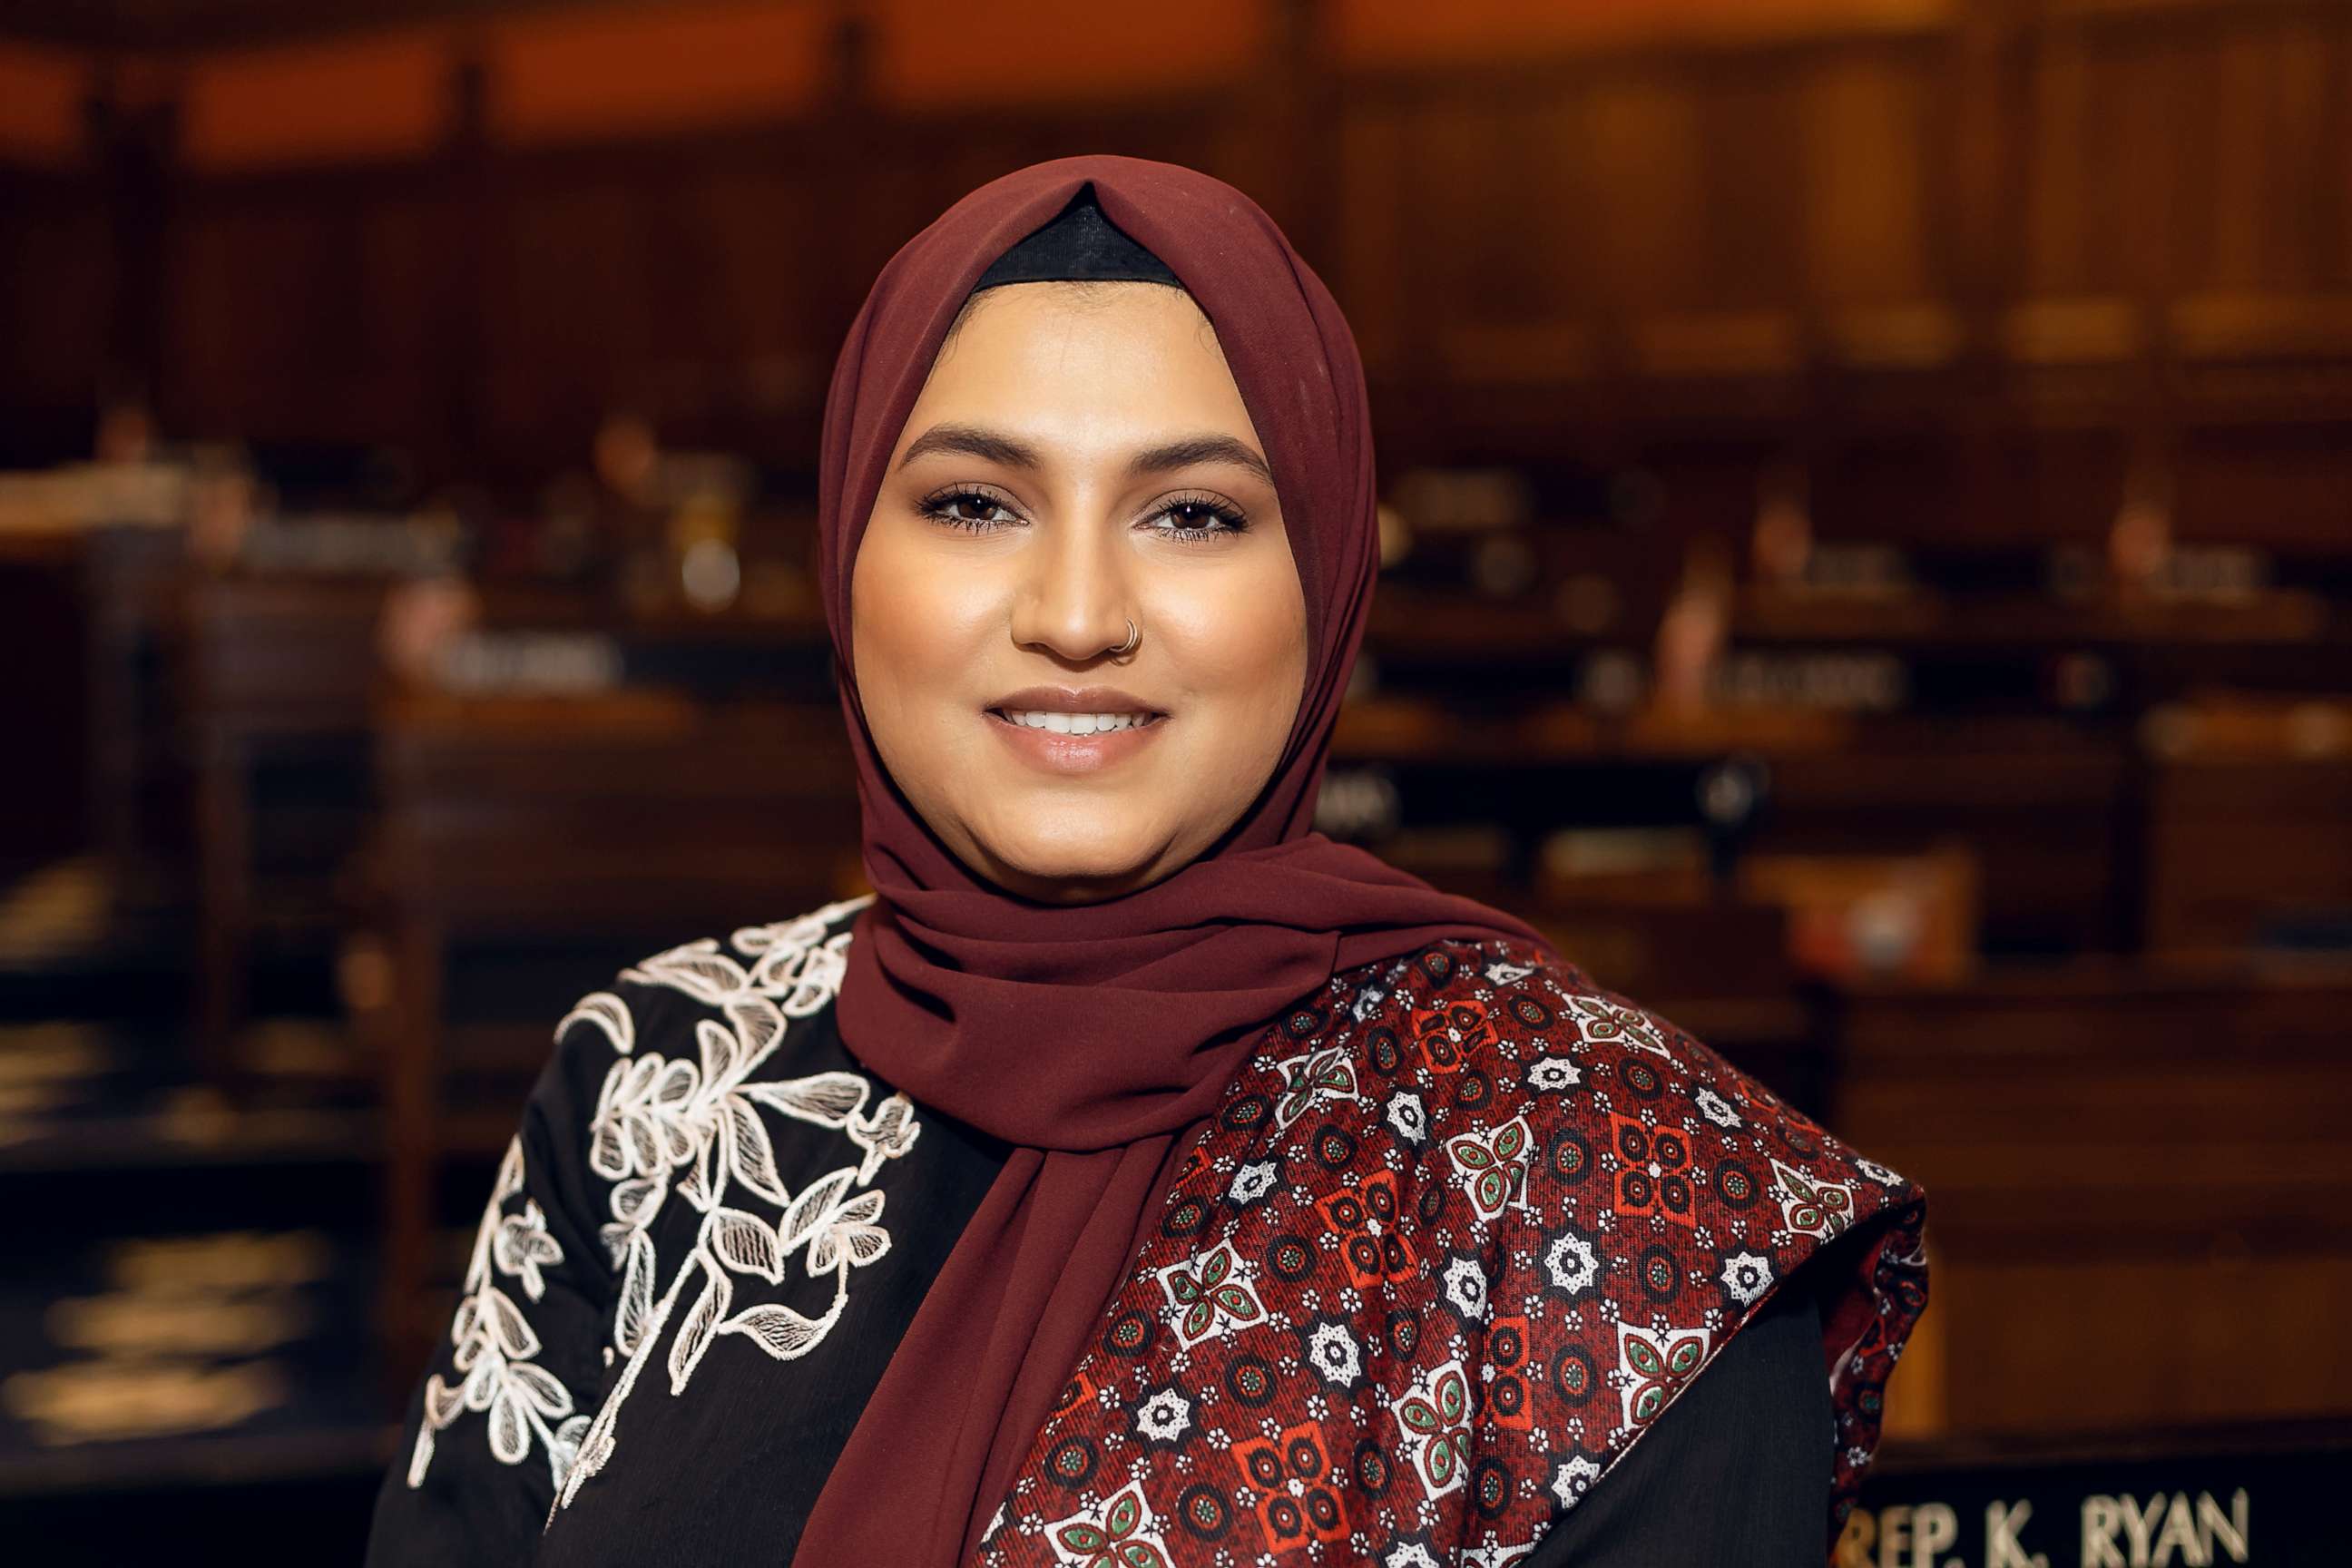 PHOTO: Connecticut state Rep. Maryam Khan is seen here in an undated file photo.